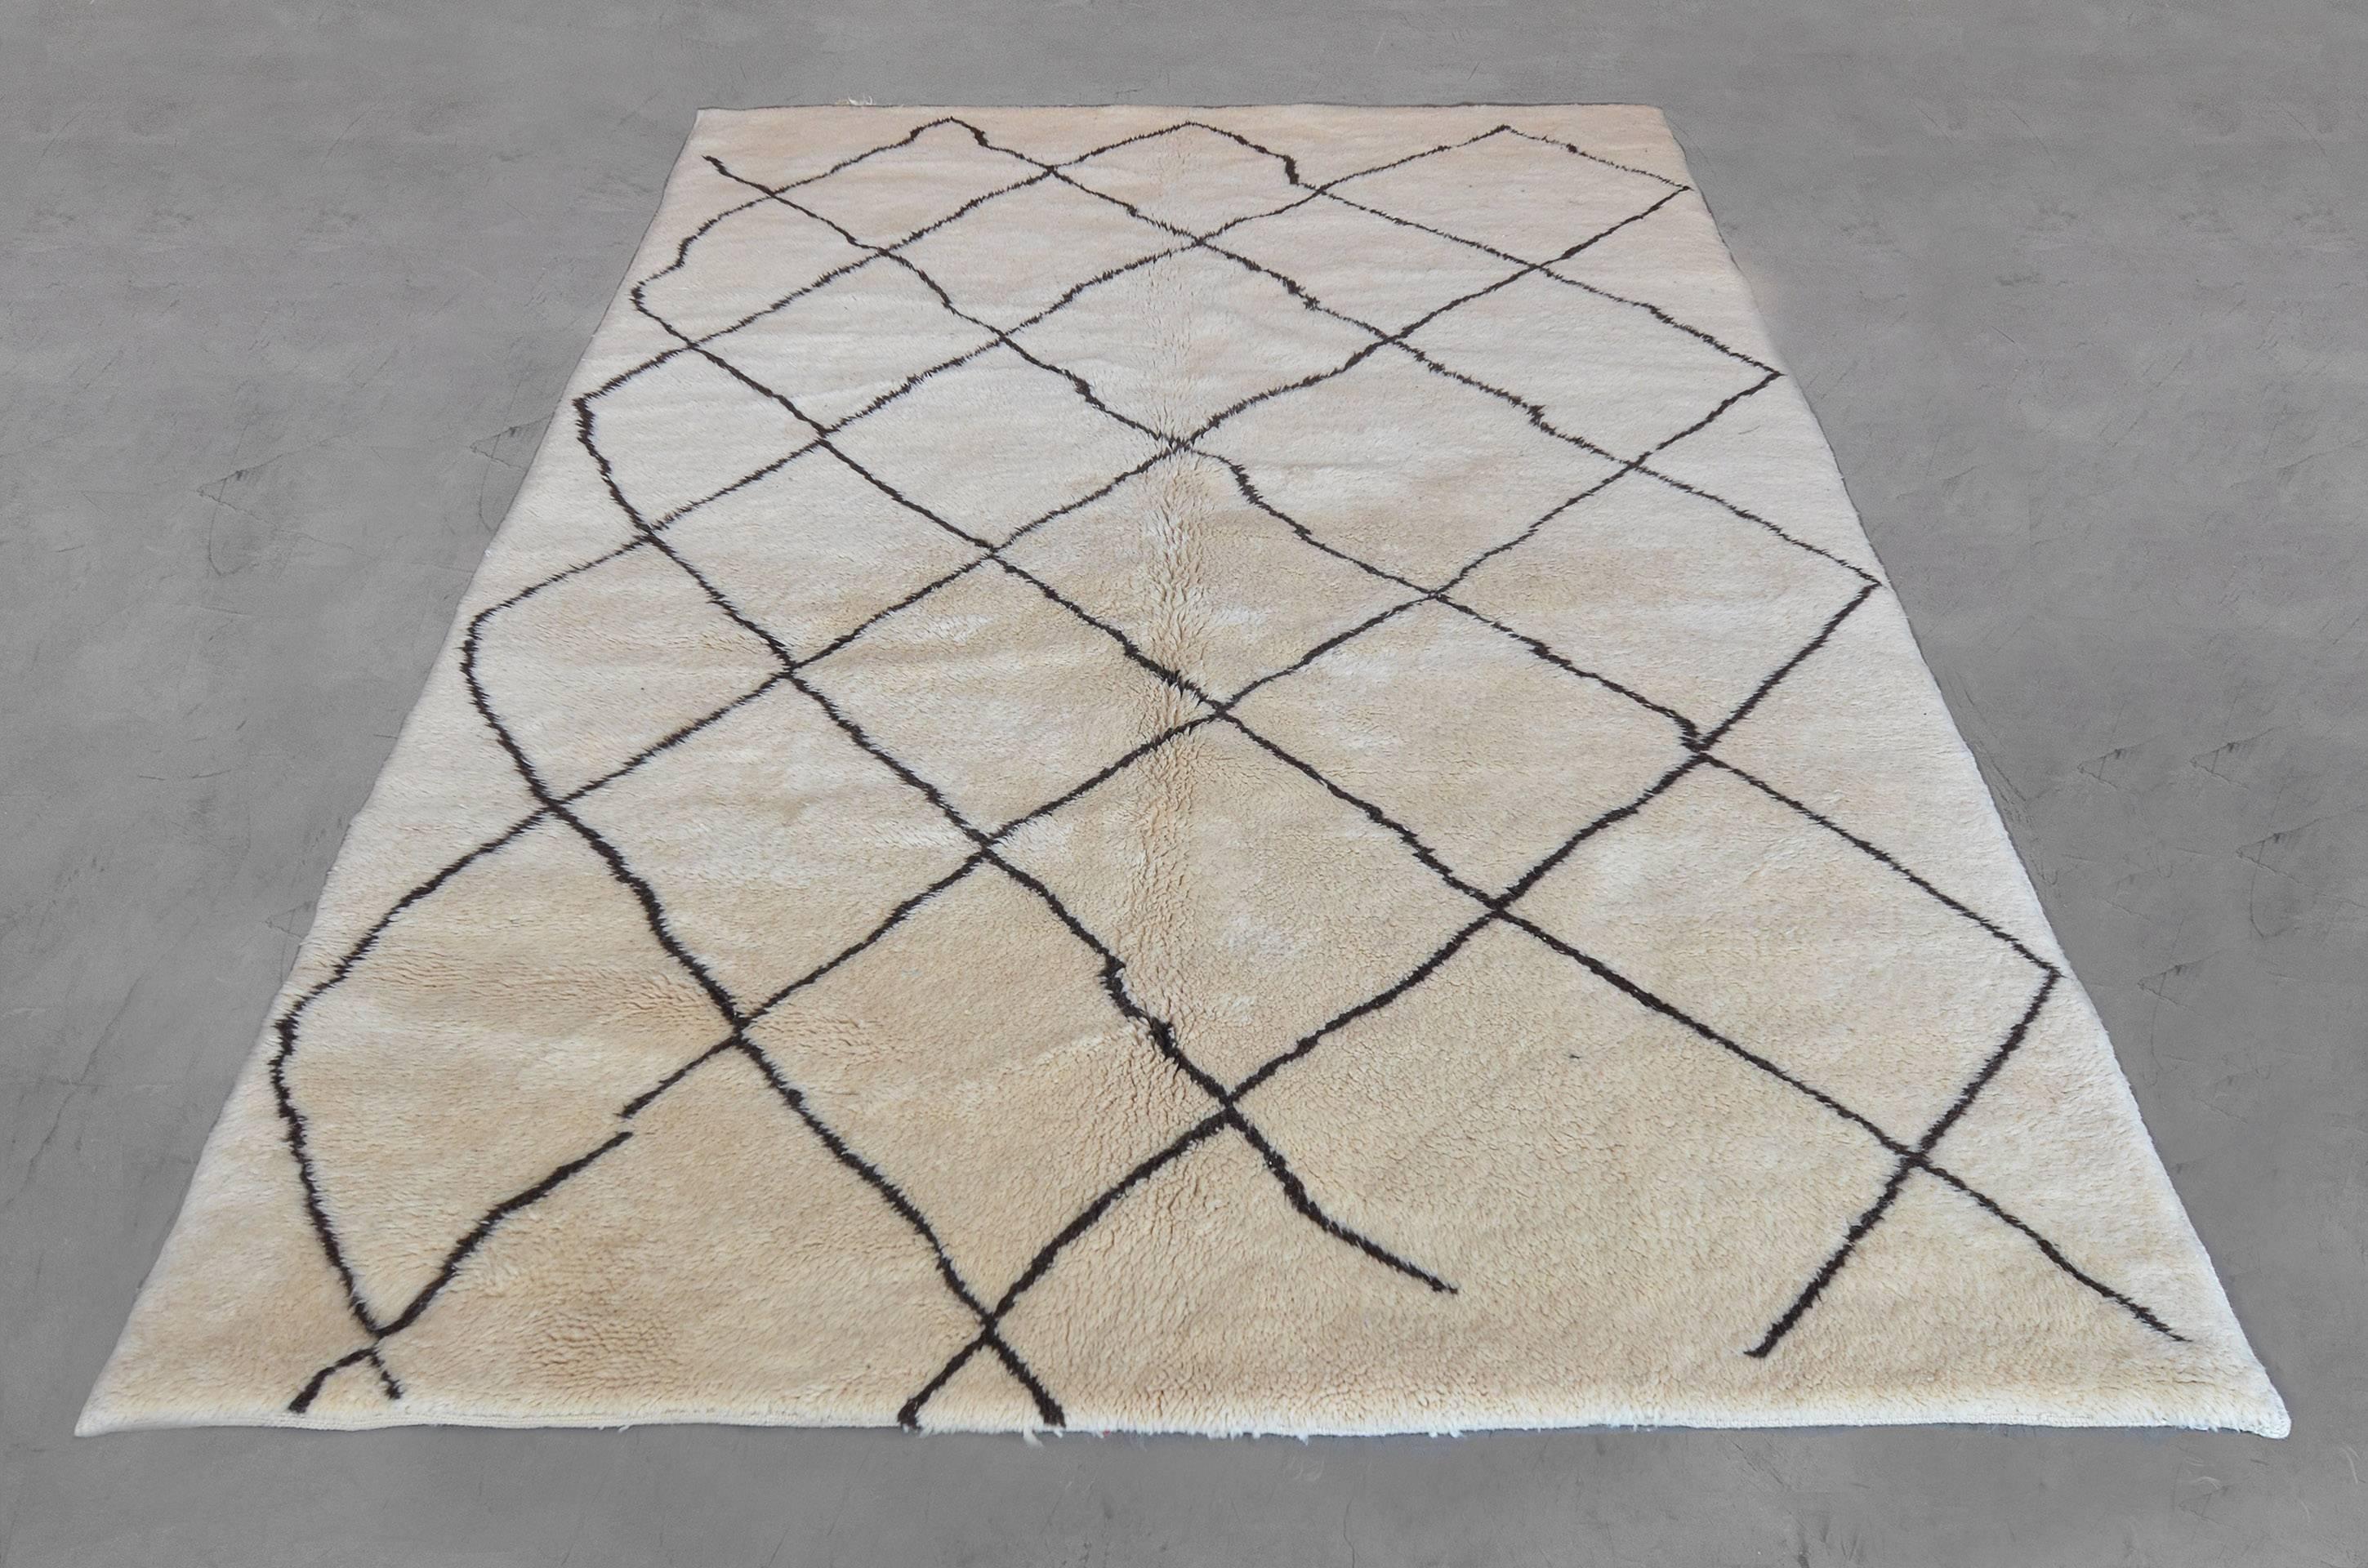 This Deco-inspired rug from the late 20th century is hand knotted in Morocco with a pared down latticework design on a soft neutral beige field. Sized at 6’4” x 9’ this ageless and versatile rug creates unlimited opportunity for any space